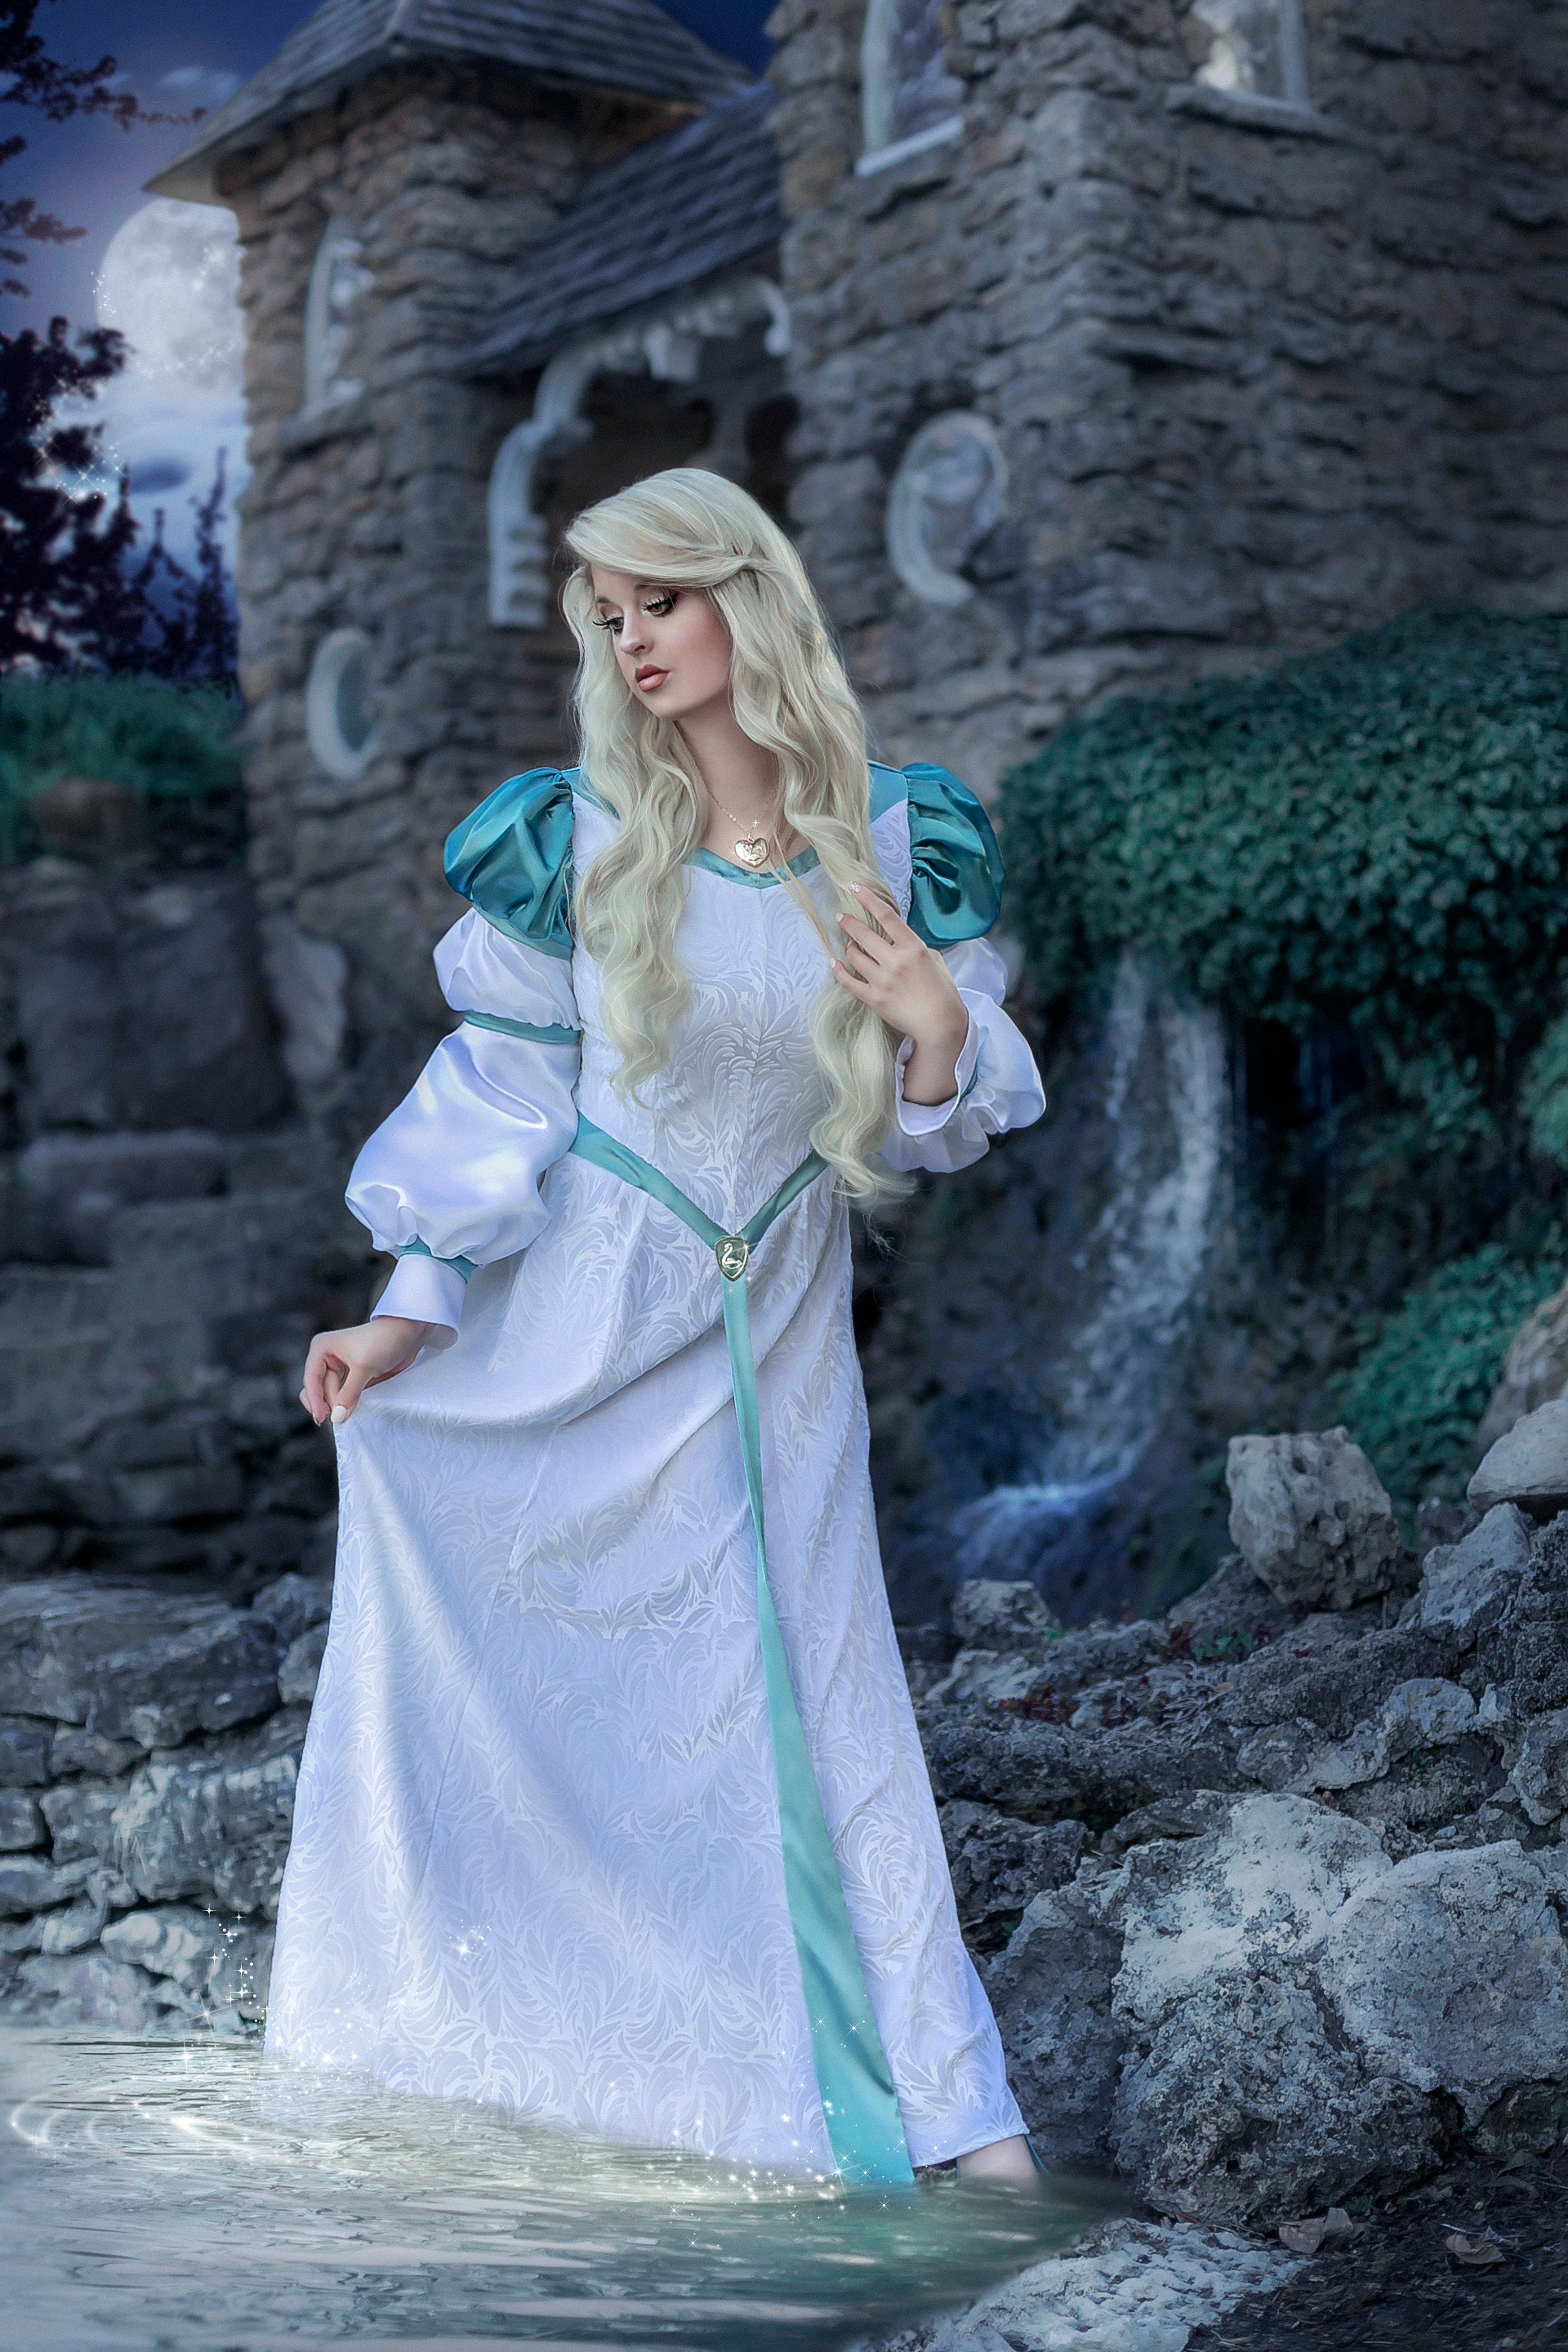 Adult Odette Costume Dress | Official Site of The Swan Princess Movie Series